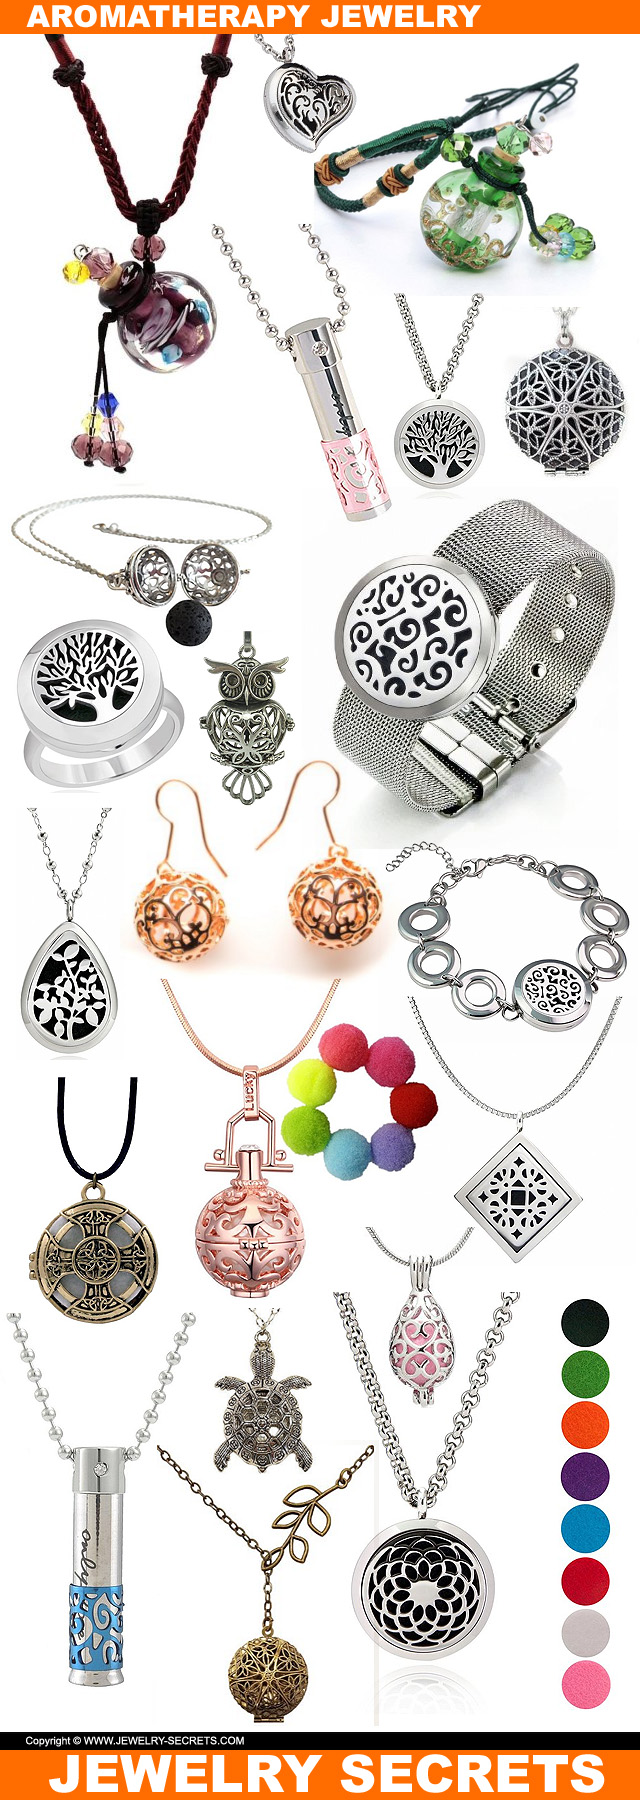 Aromatherapy Oil Diffuser Jewelry